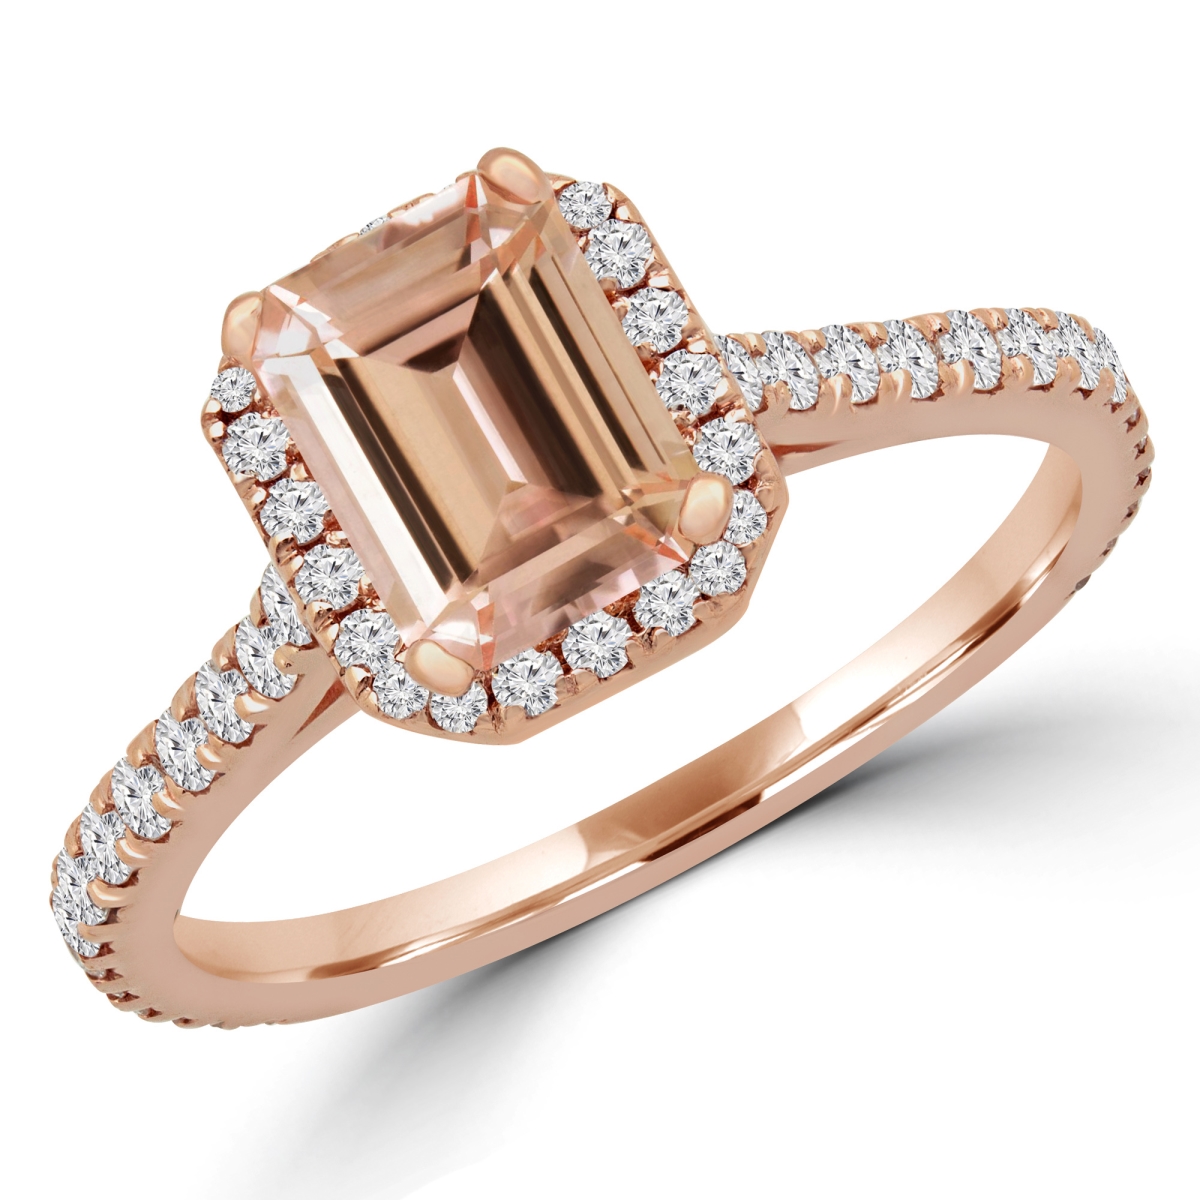 MD180580-3.25 1.25 CTW Emerald Pink Morganite Halo Engagement Ring in 14K Rose Gold - Size 3.25